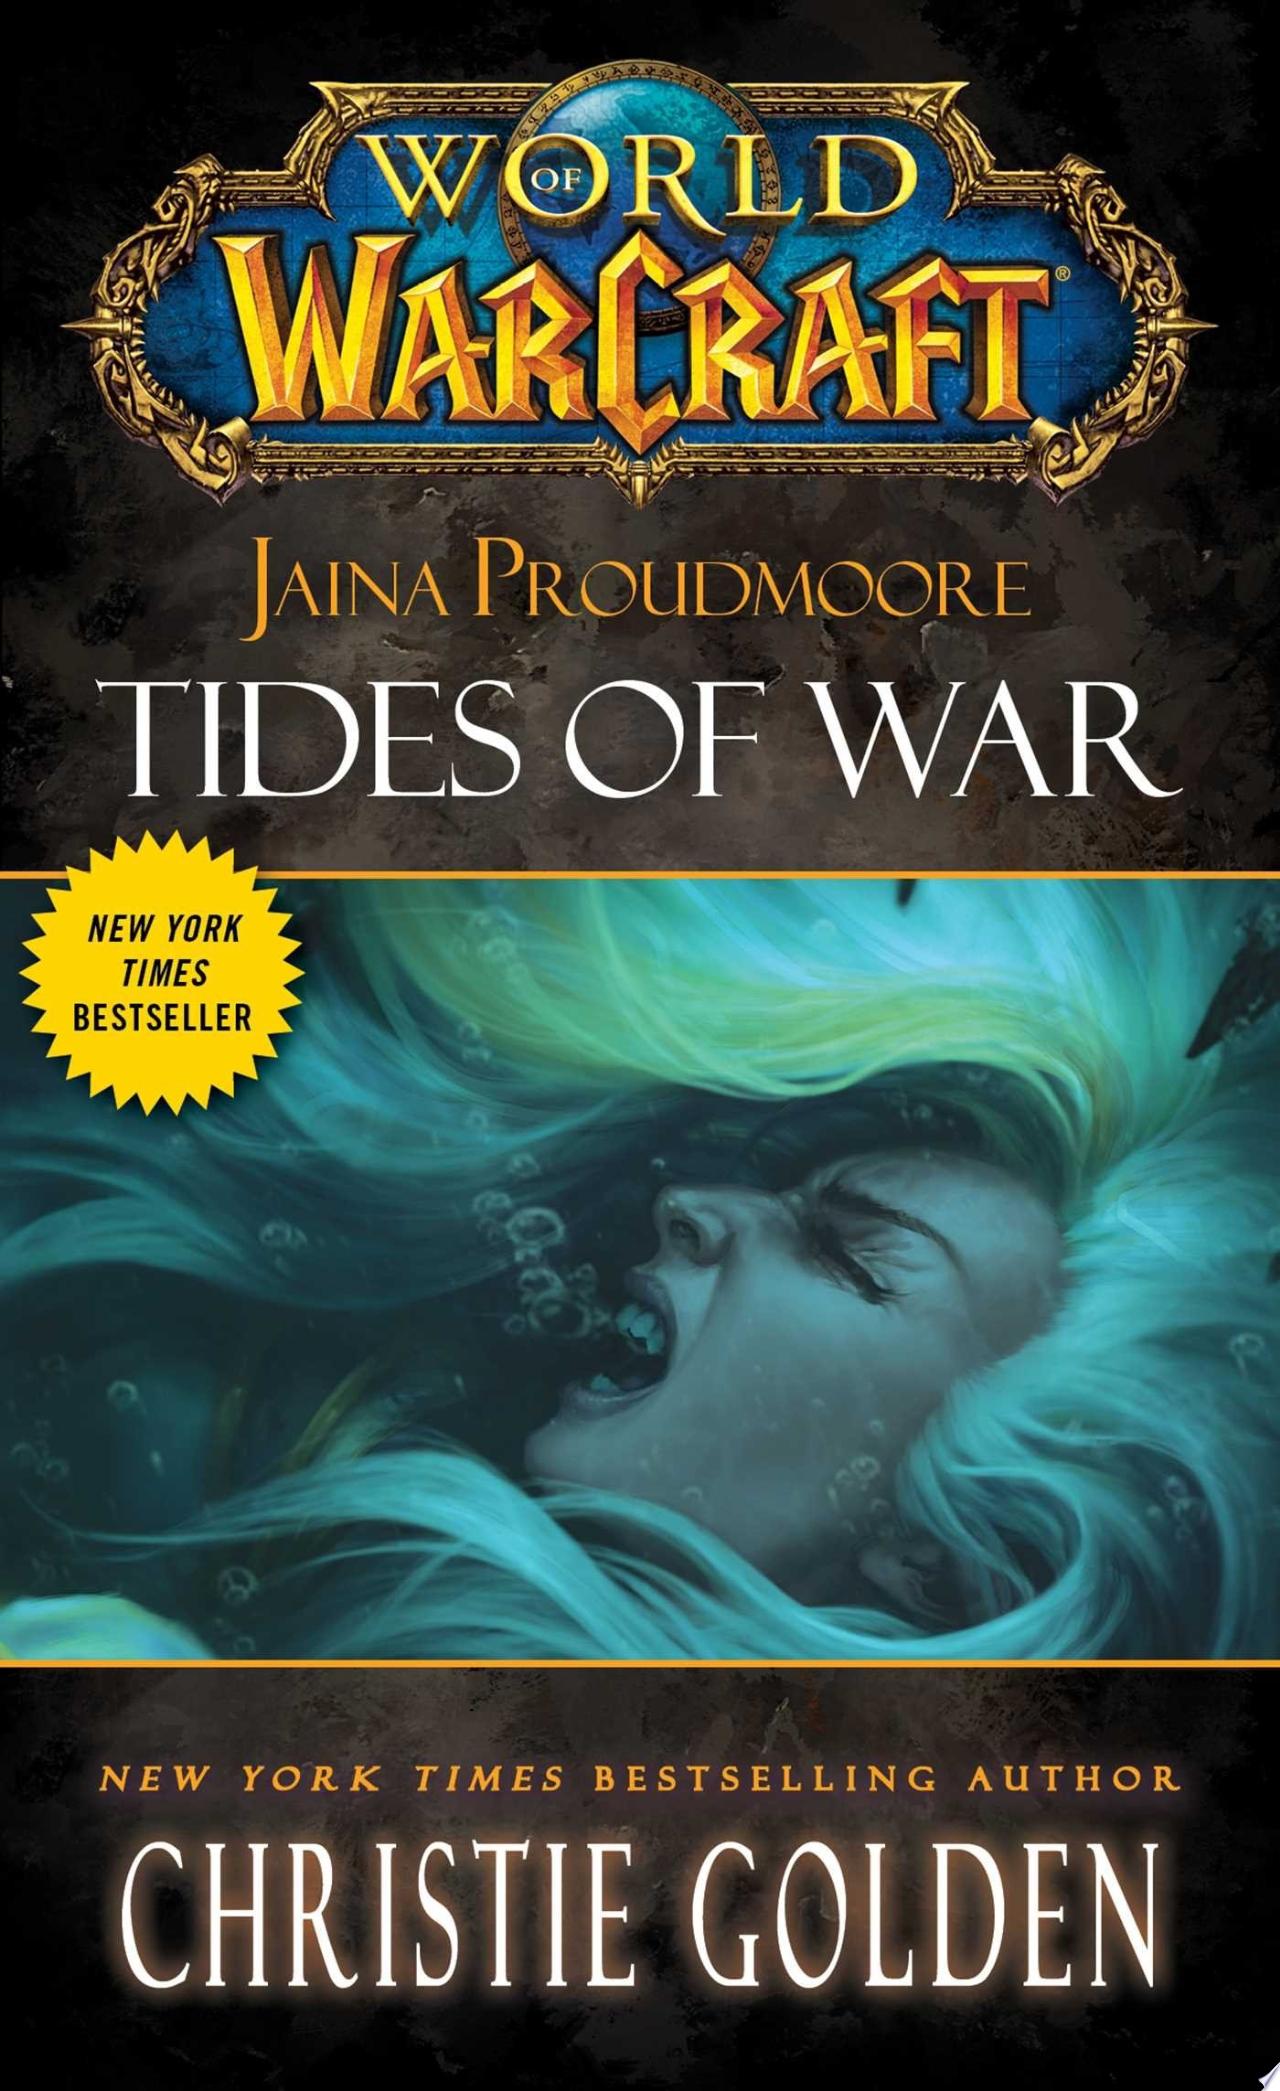 Book Cover for World of Warcraft: Jaina Proudmoore: Tides of War